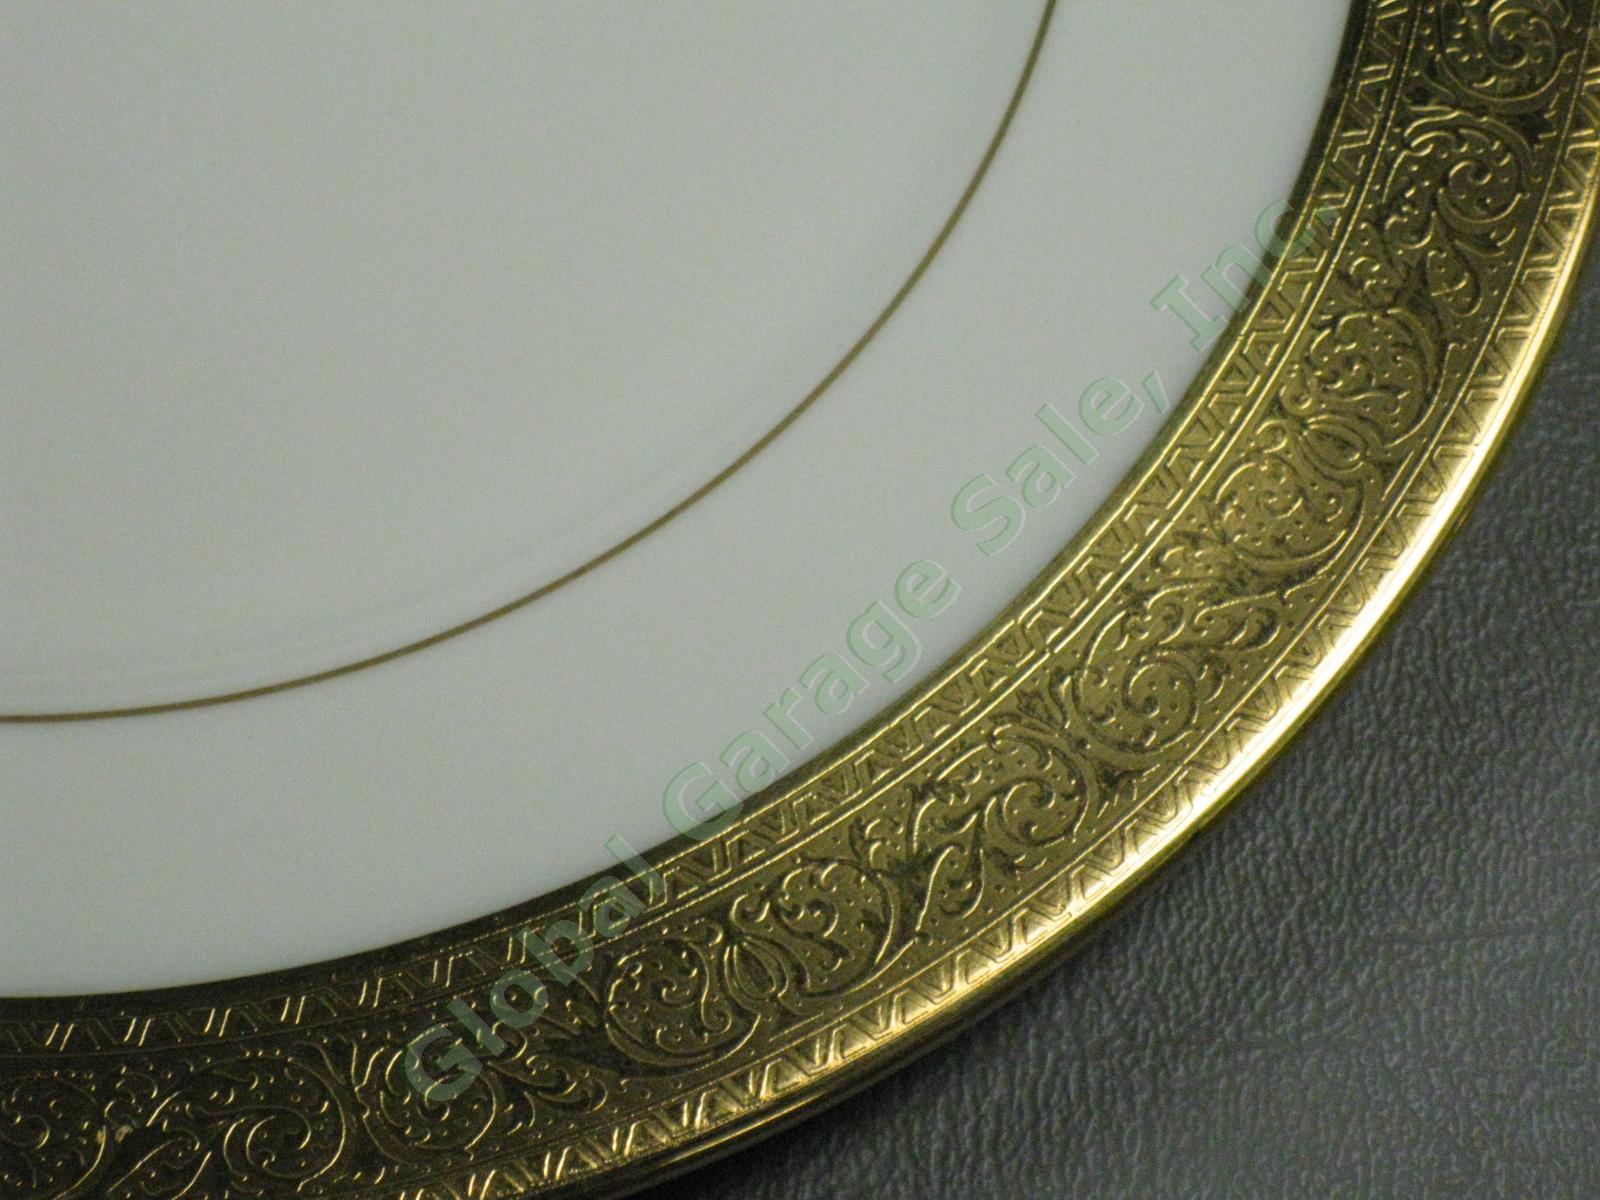 4 Lenox Westchester China M139 Presidential Gold Encrusted 8-3/8" Salad Plates 2